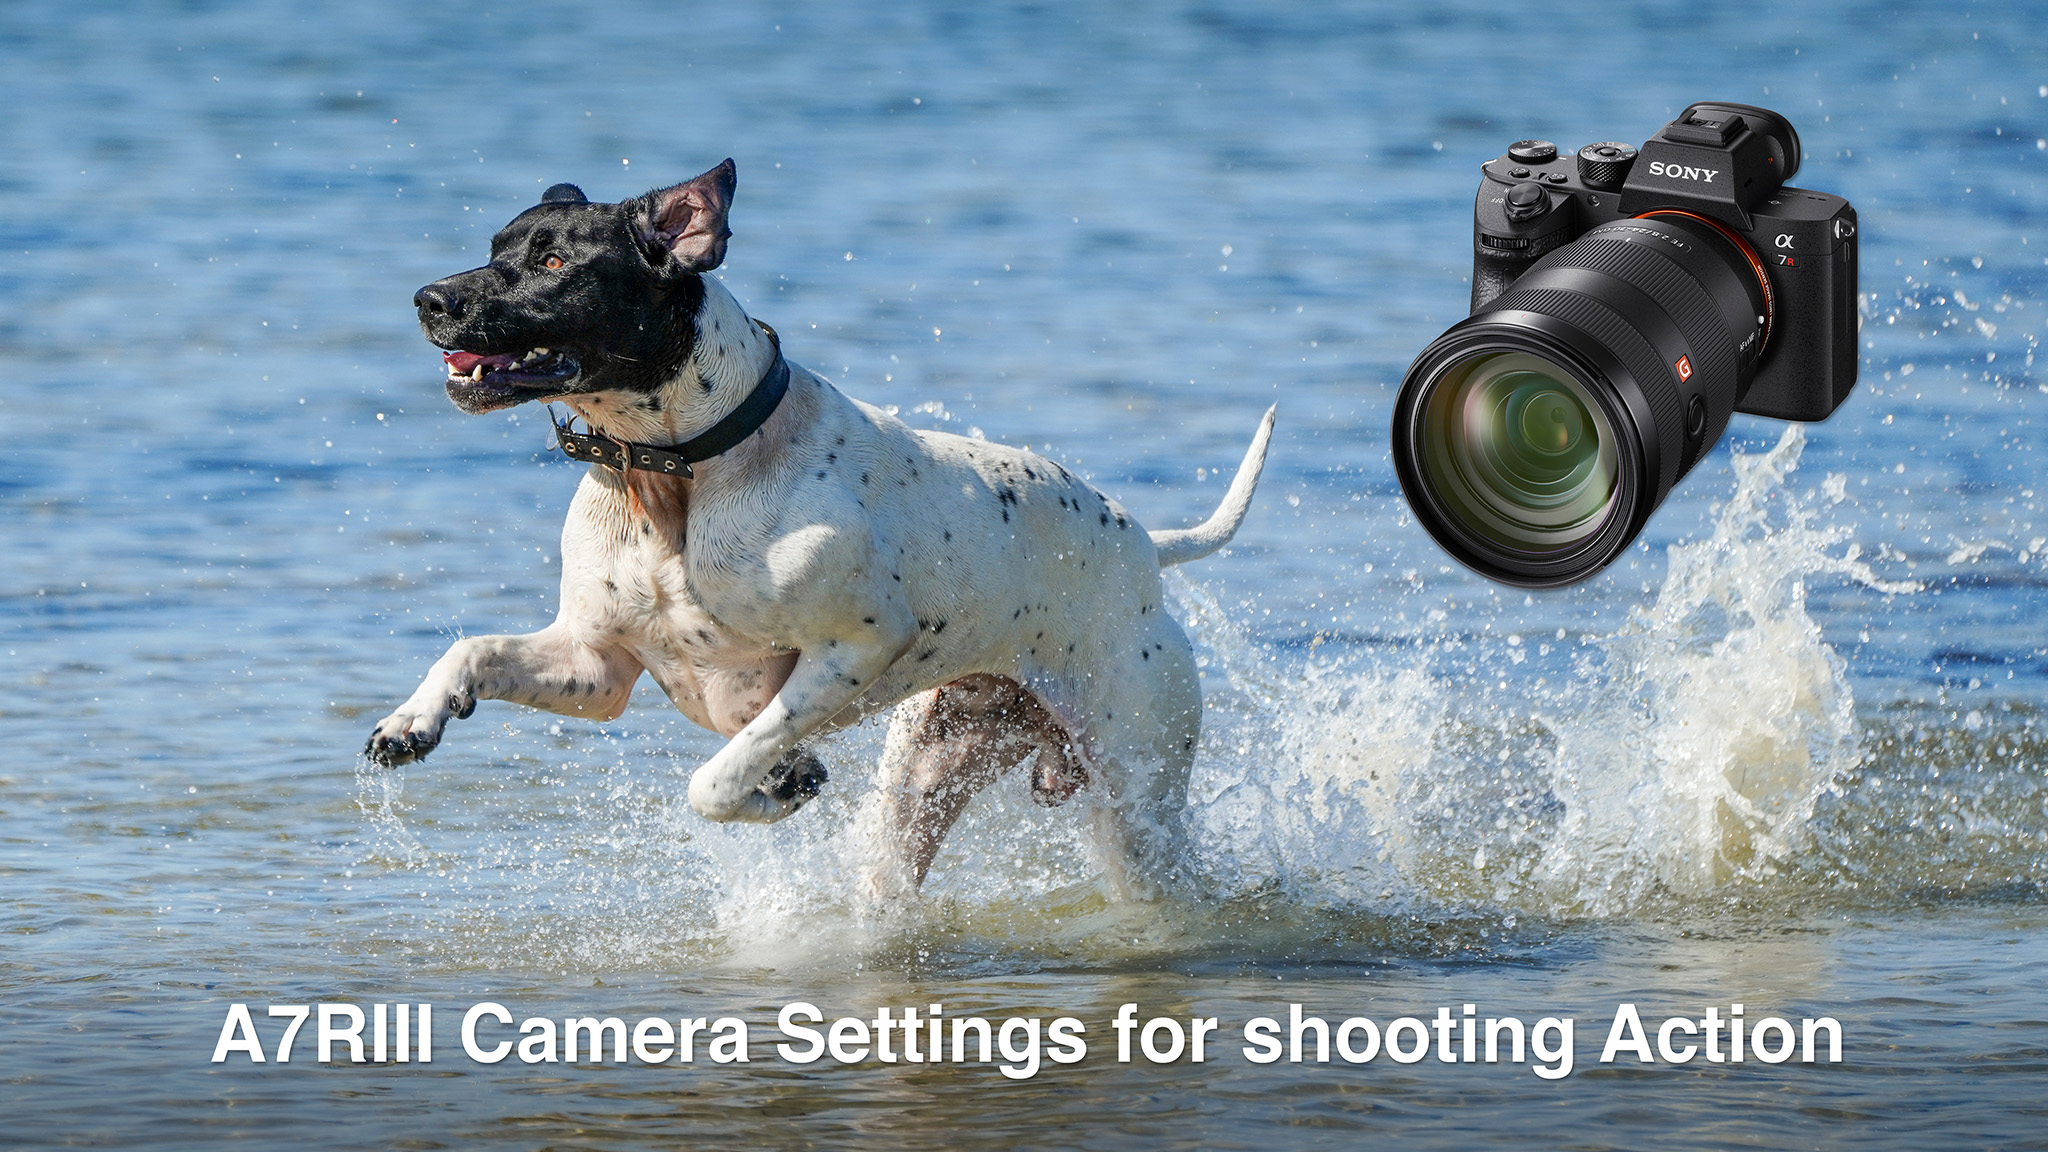 A7RIII Camera Settings for Shooting Action and Wildlife